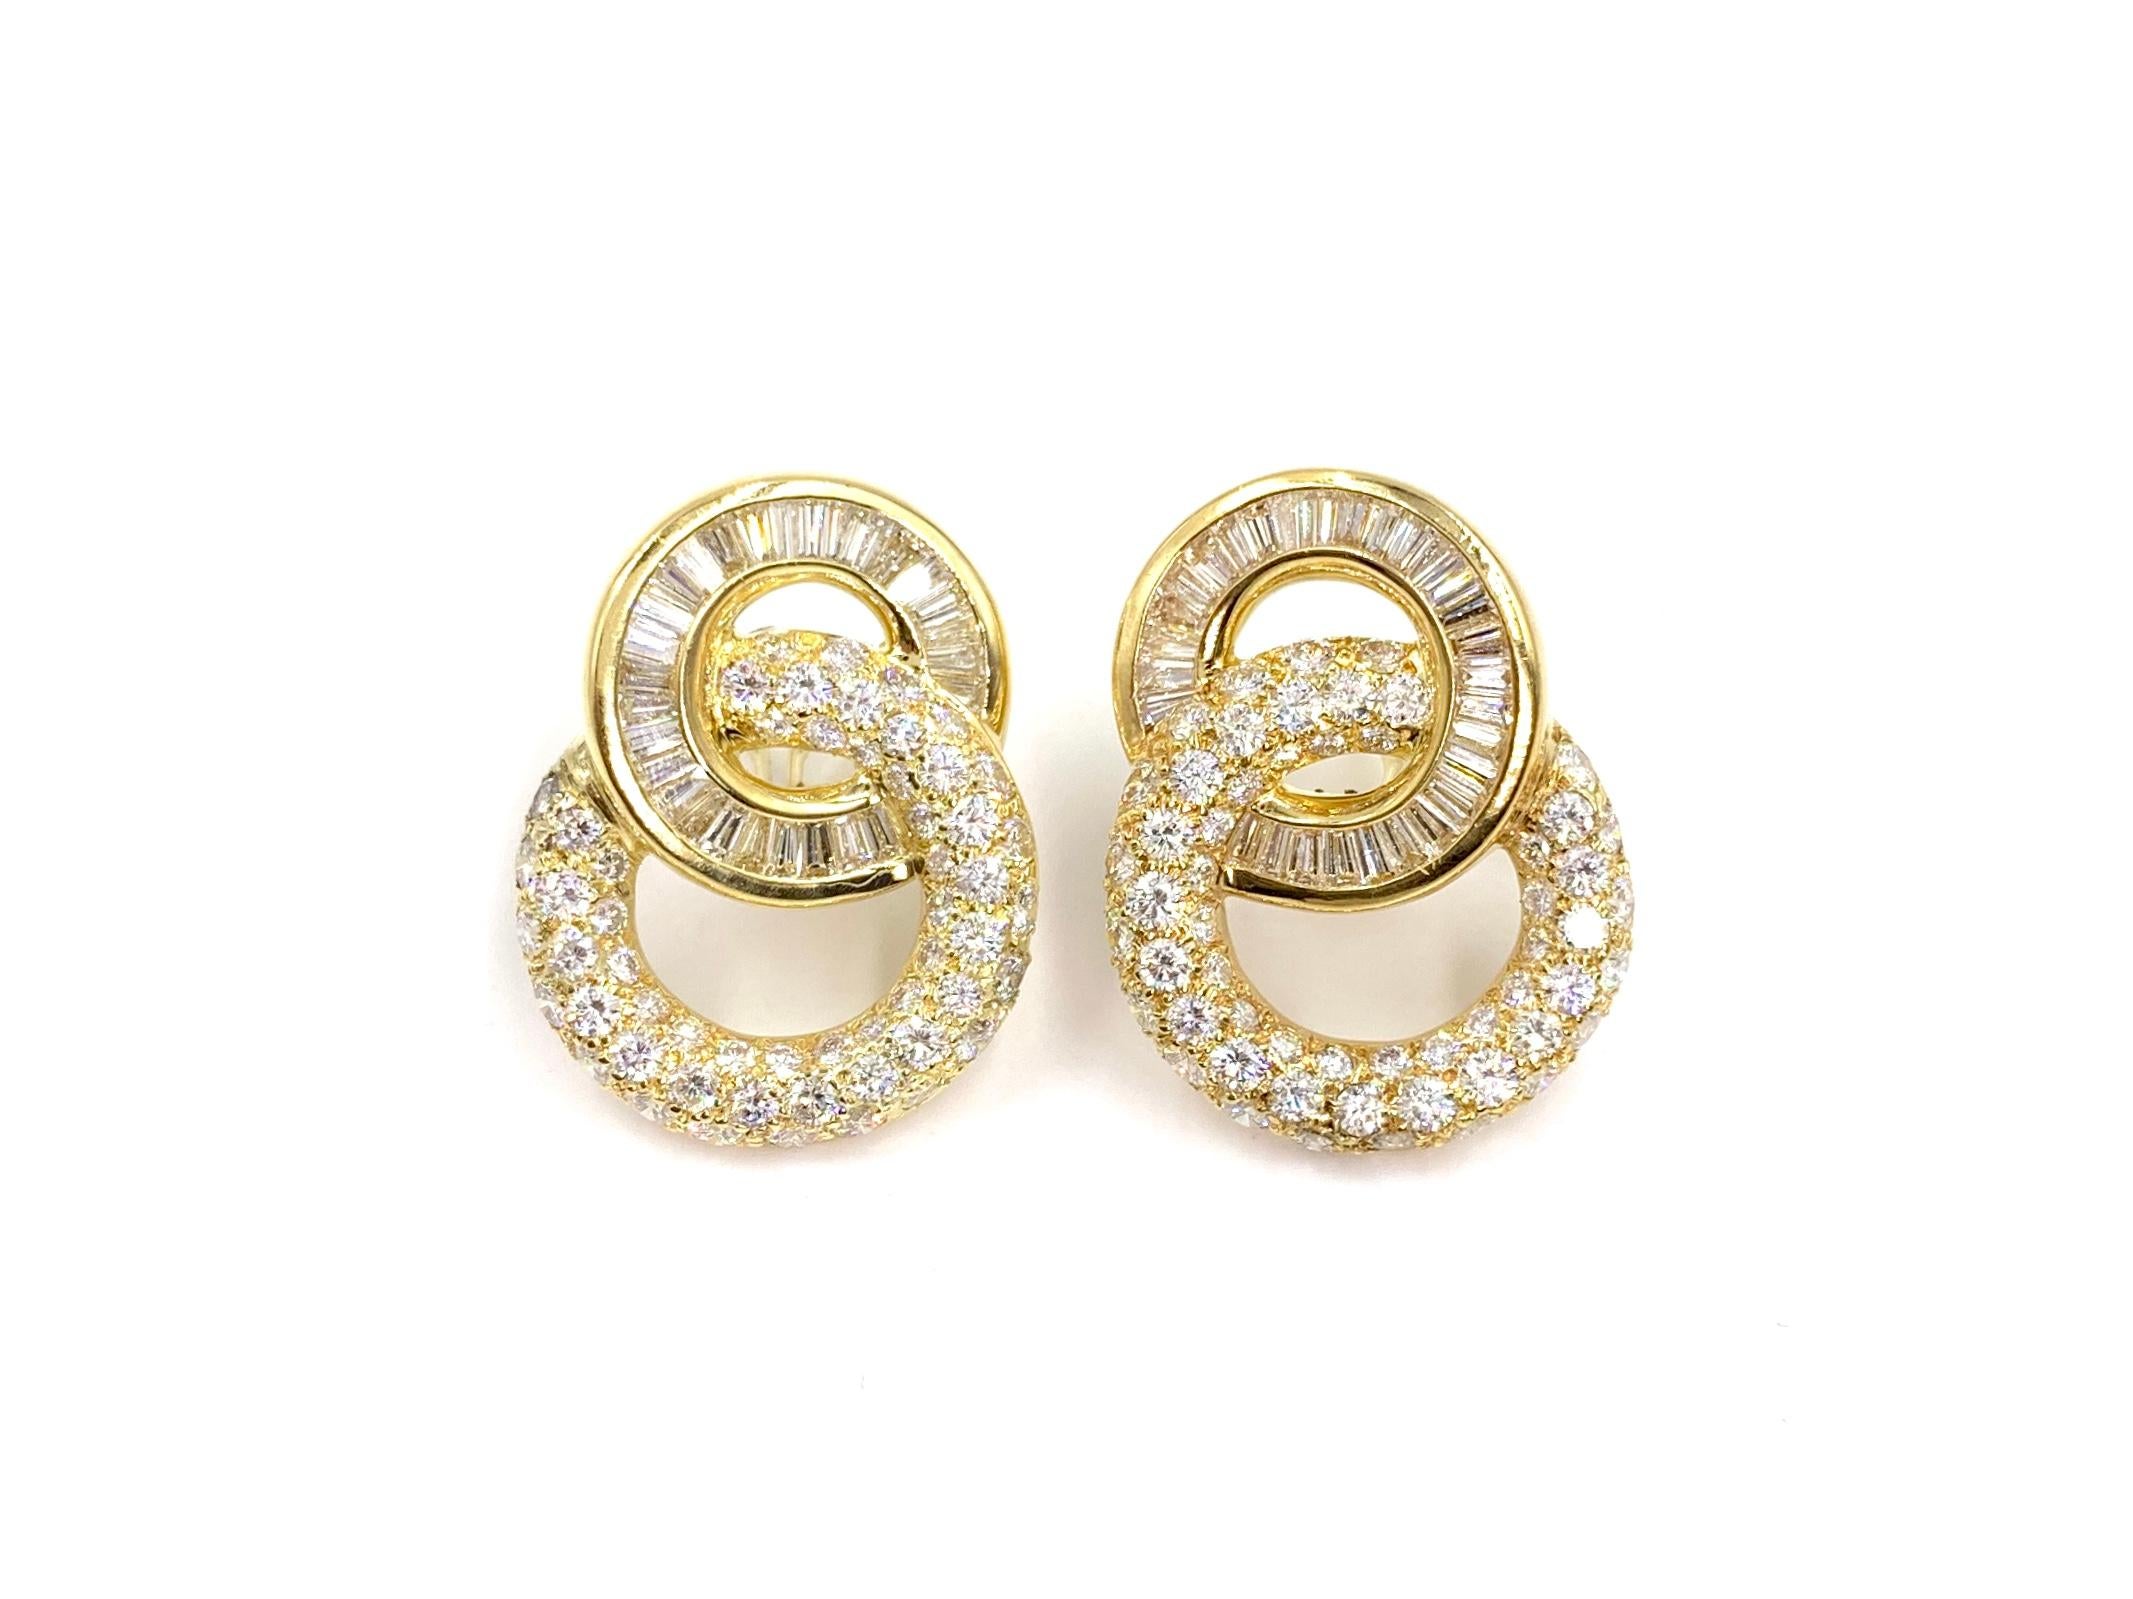 Incredibly well made with a beautiful timeless design, these 18 karat yellow gold earrings feature approximately 9 carats of round brilliant and baguette cut diamonds. Diamonds are of high quality at approximately F-G color, VS1-VS2 clarity. Round